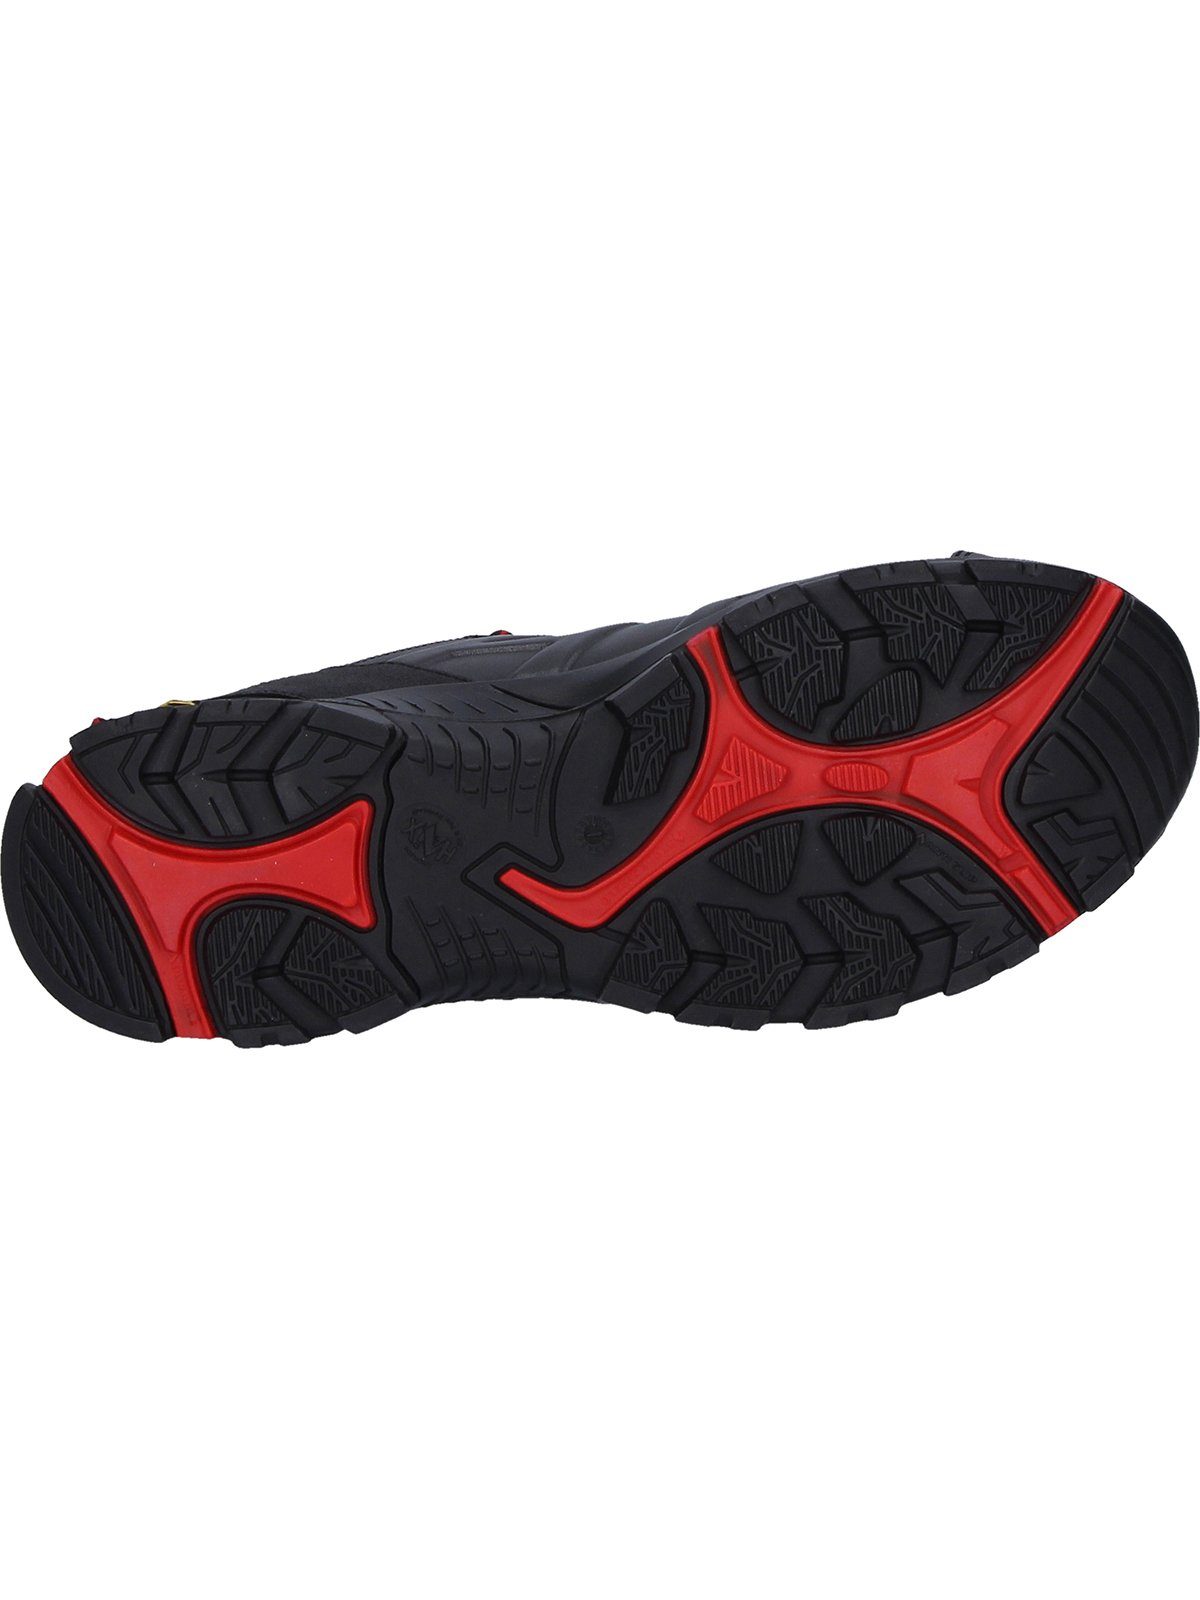 black/red Black 54 Safety haix Eagle Arbeitsschuh low